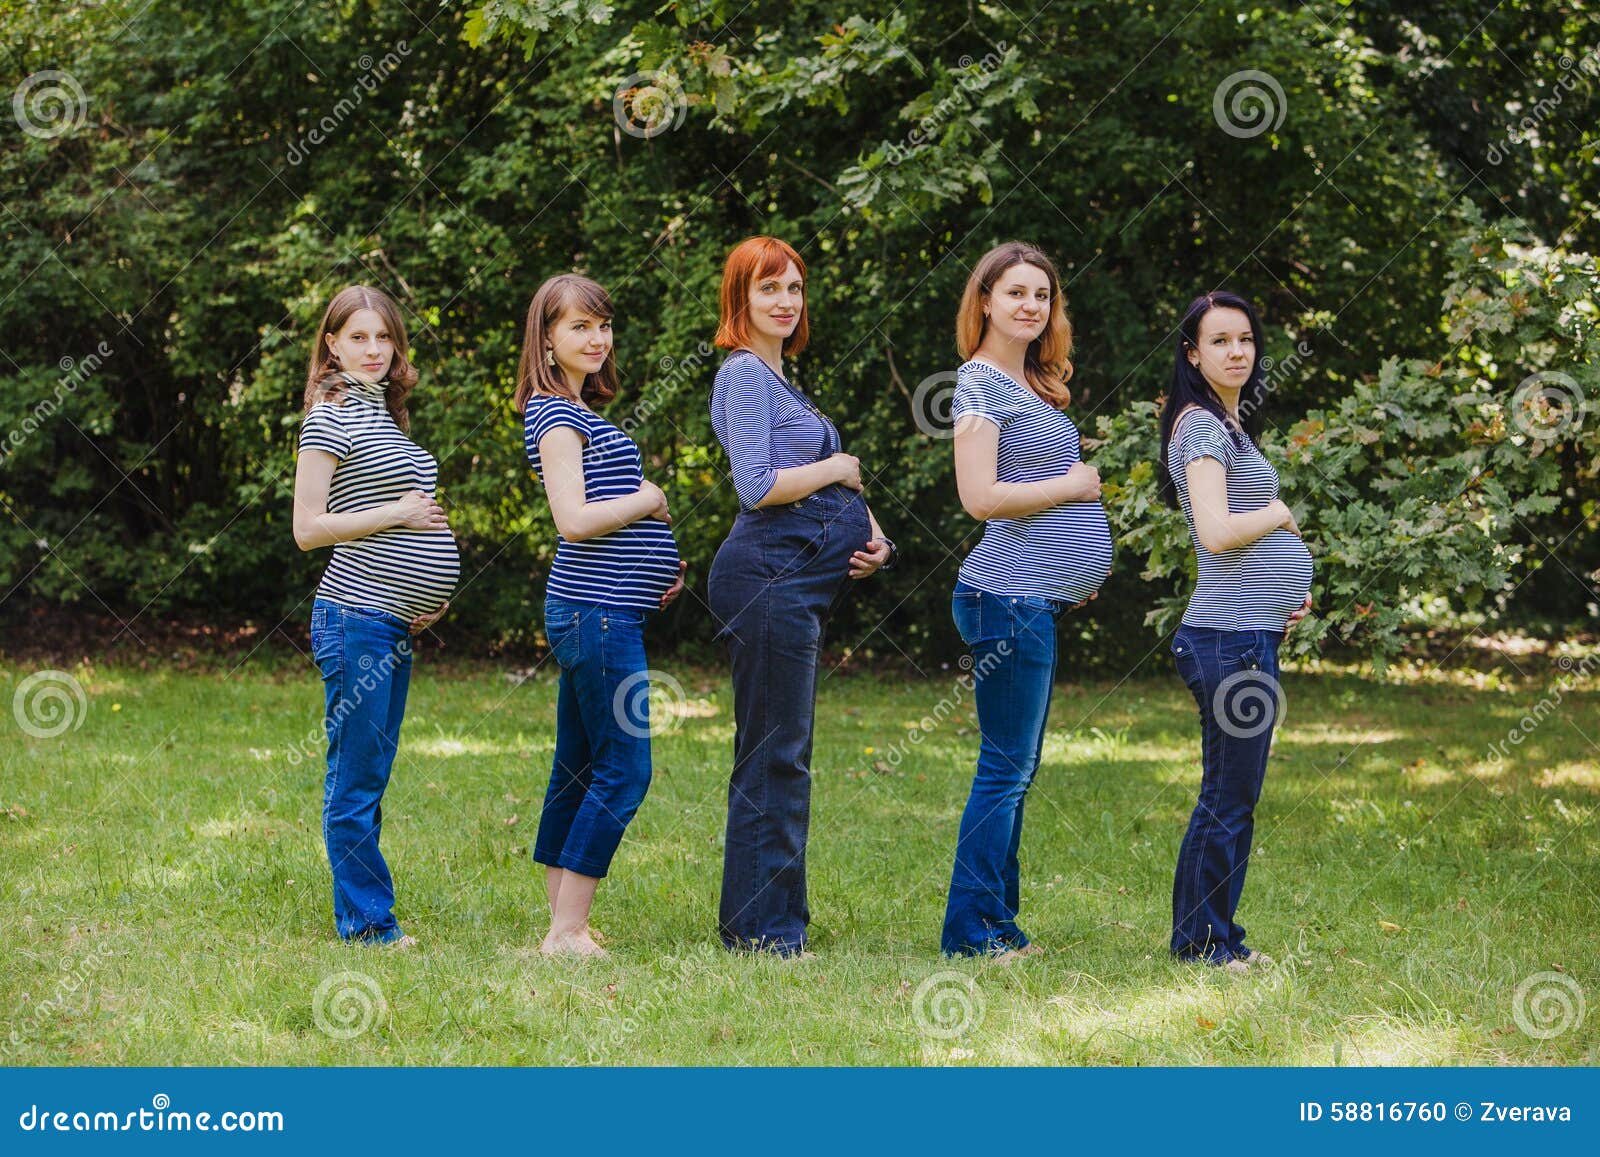 Five Pregnant Women In The Same Clothes Outdoor Stock